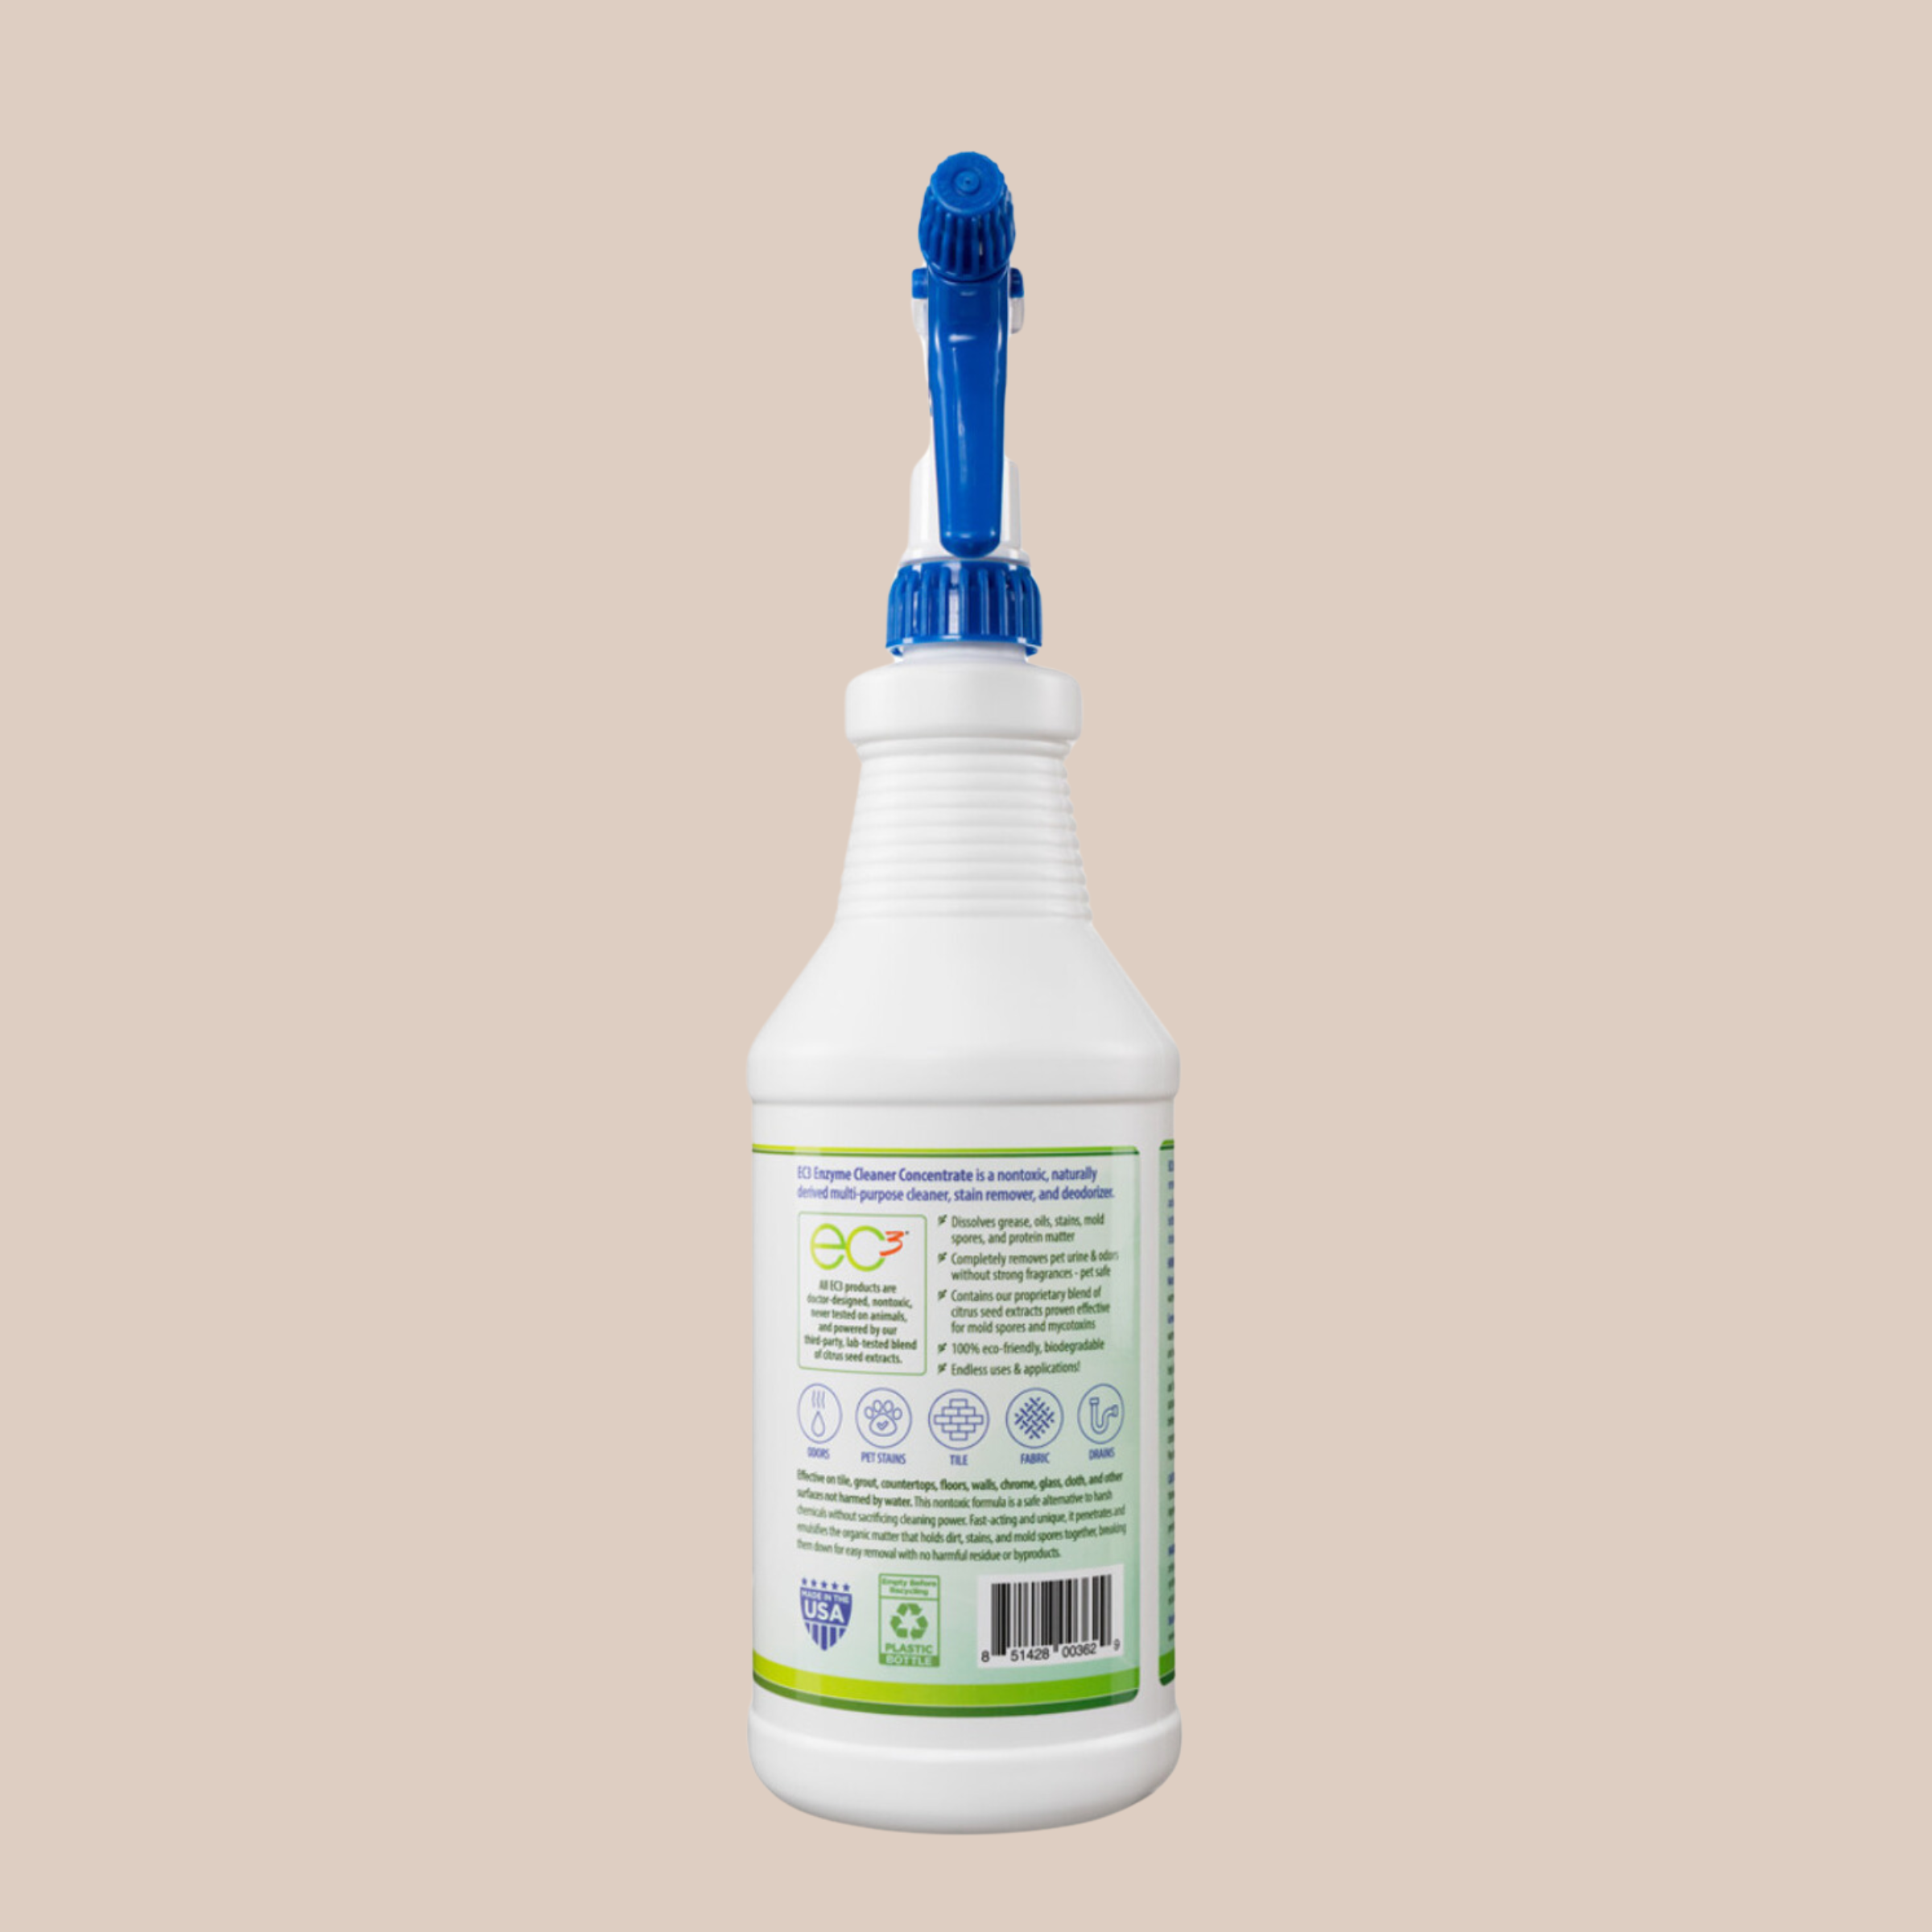 Enzyme Cleaner Concentrate